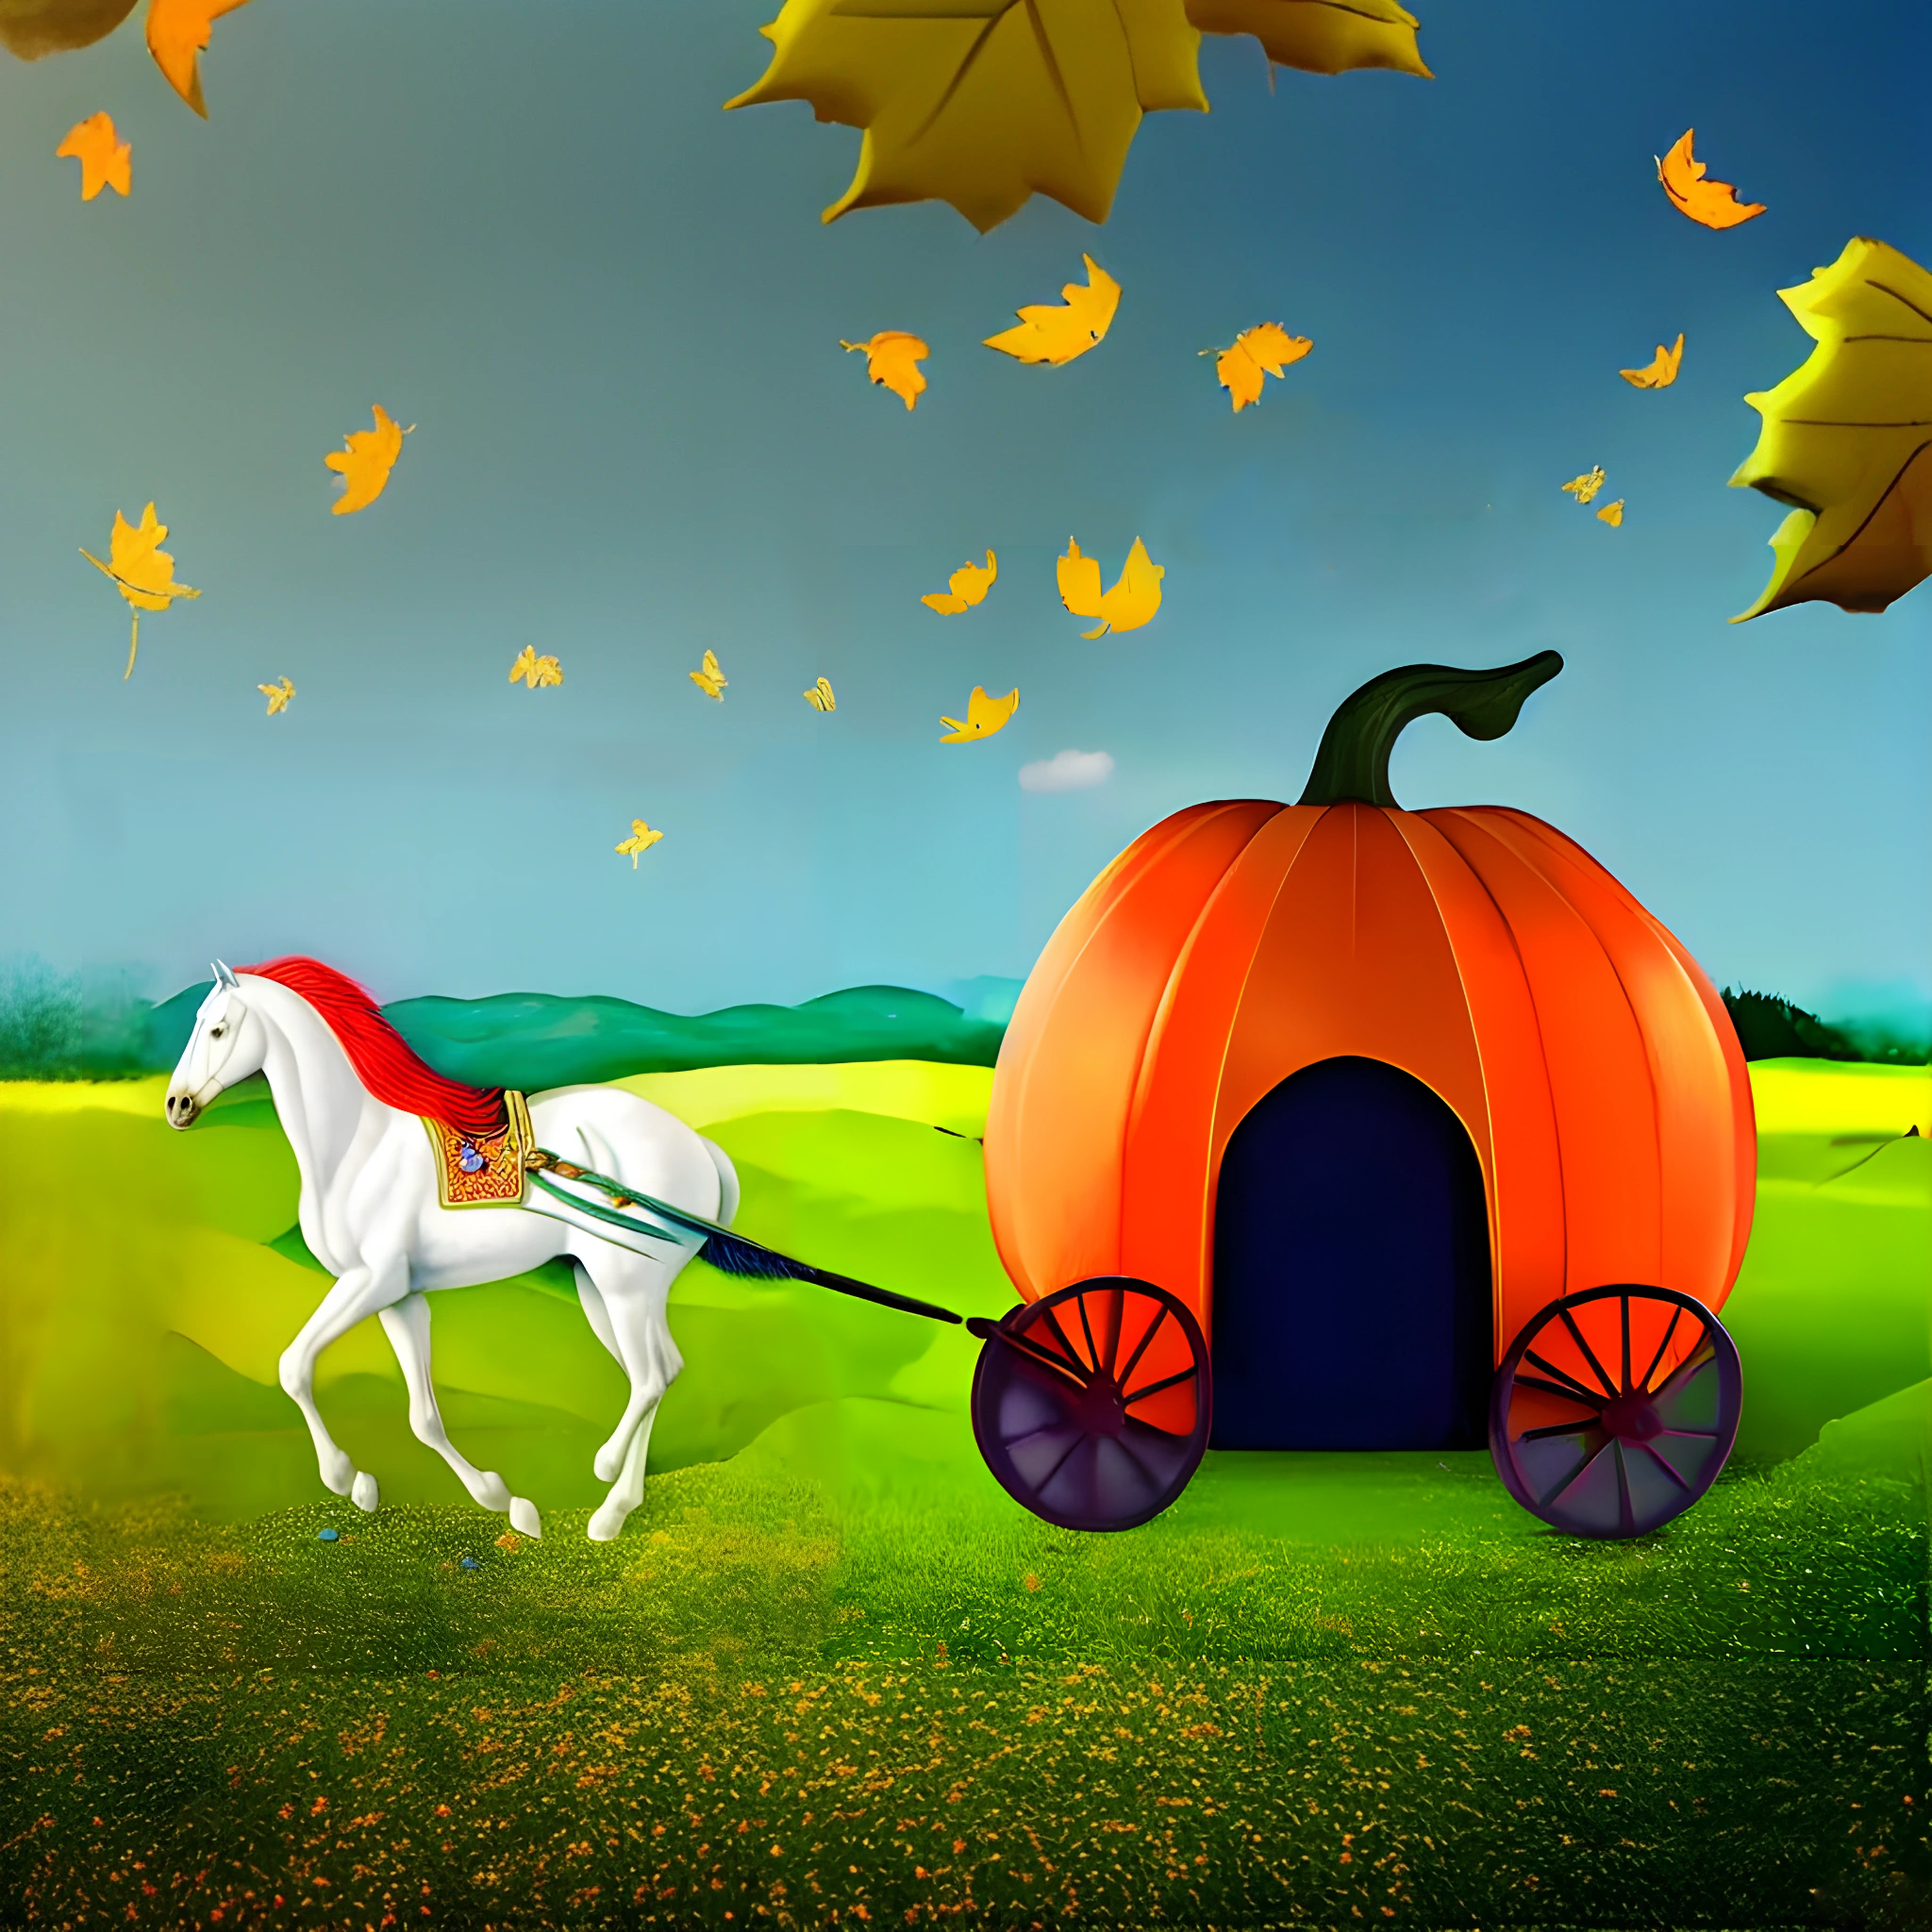 The horse and pumpkin-carriage